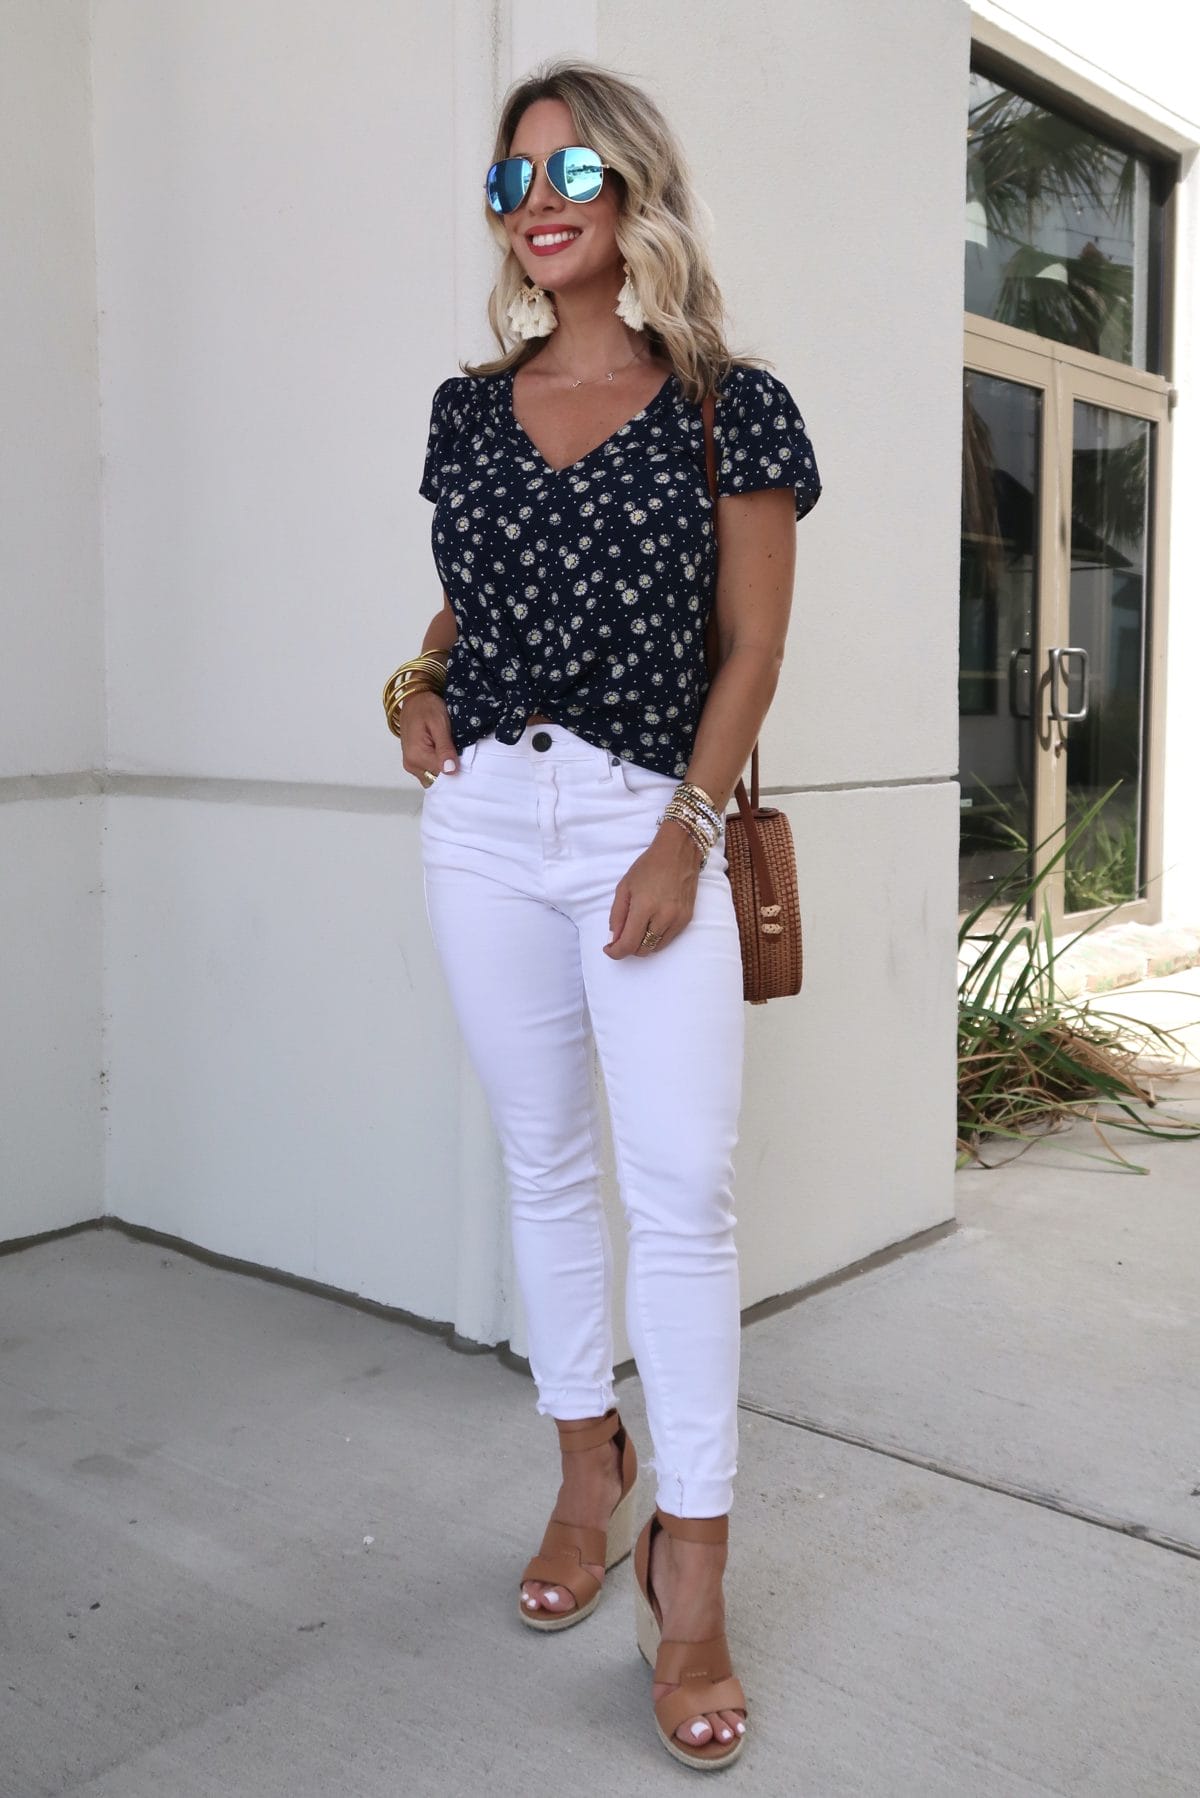 Outfit Roundup, Daisy Print Top, White Skinny Jeans, Wedges, Circle Woven Bag